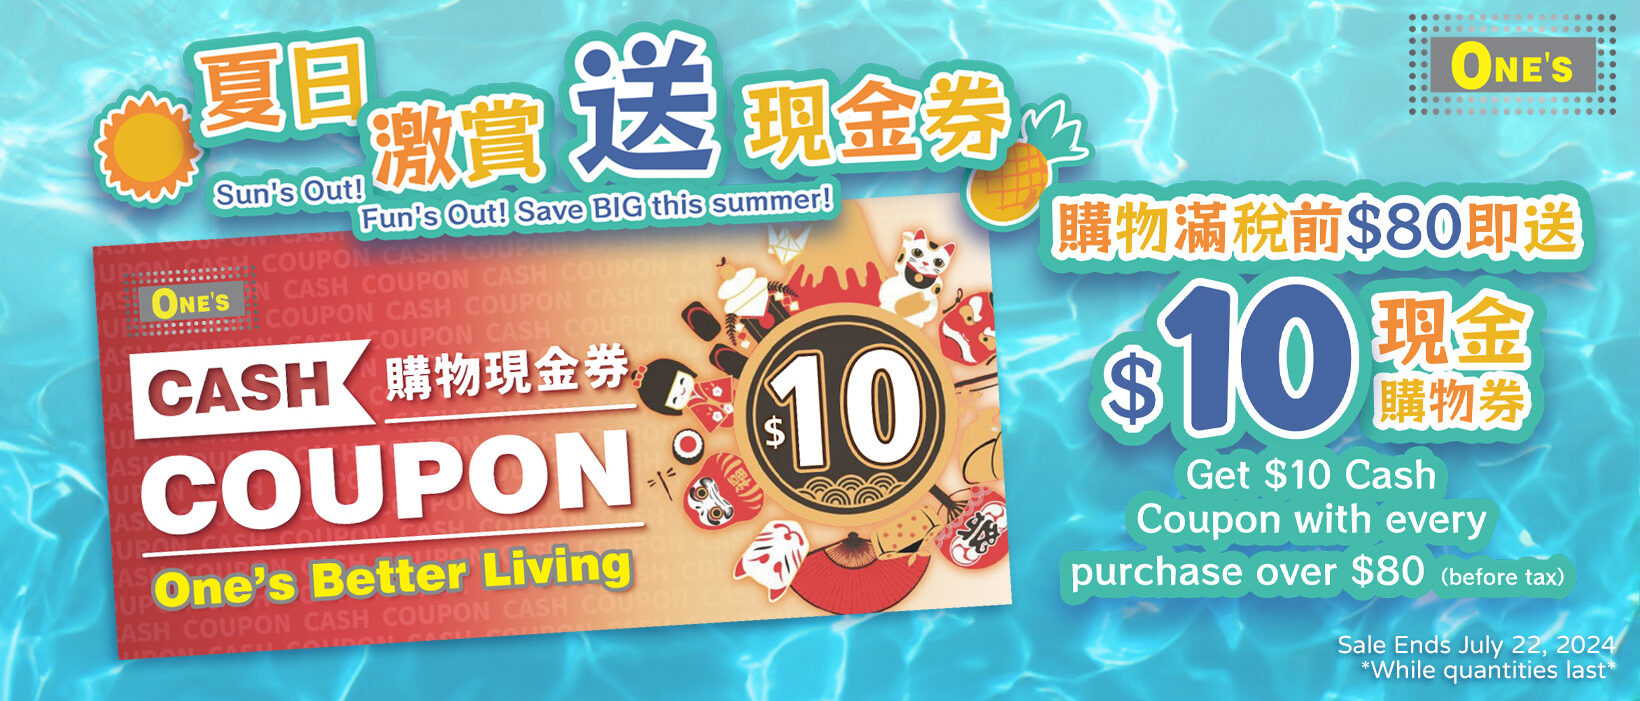 One's Better Living Summer Crazy Sale's Flyer Limited time promotion! Get $10 Cash Coupon with every purchase over $80 (Before tax)